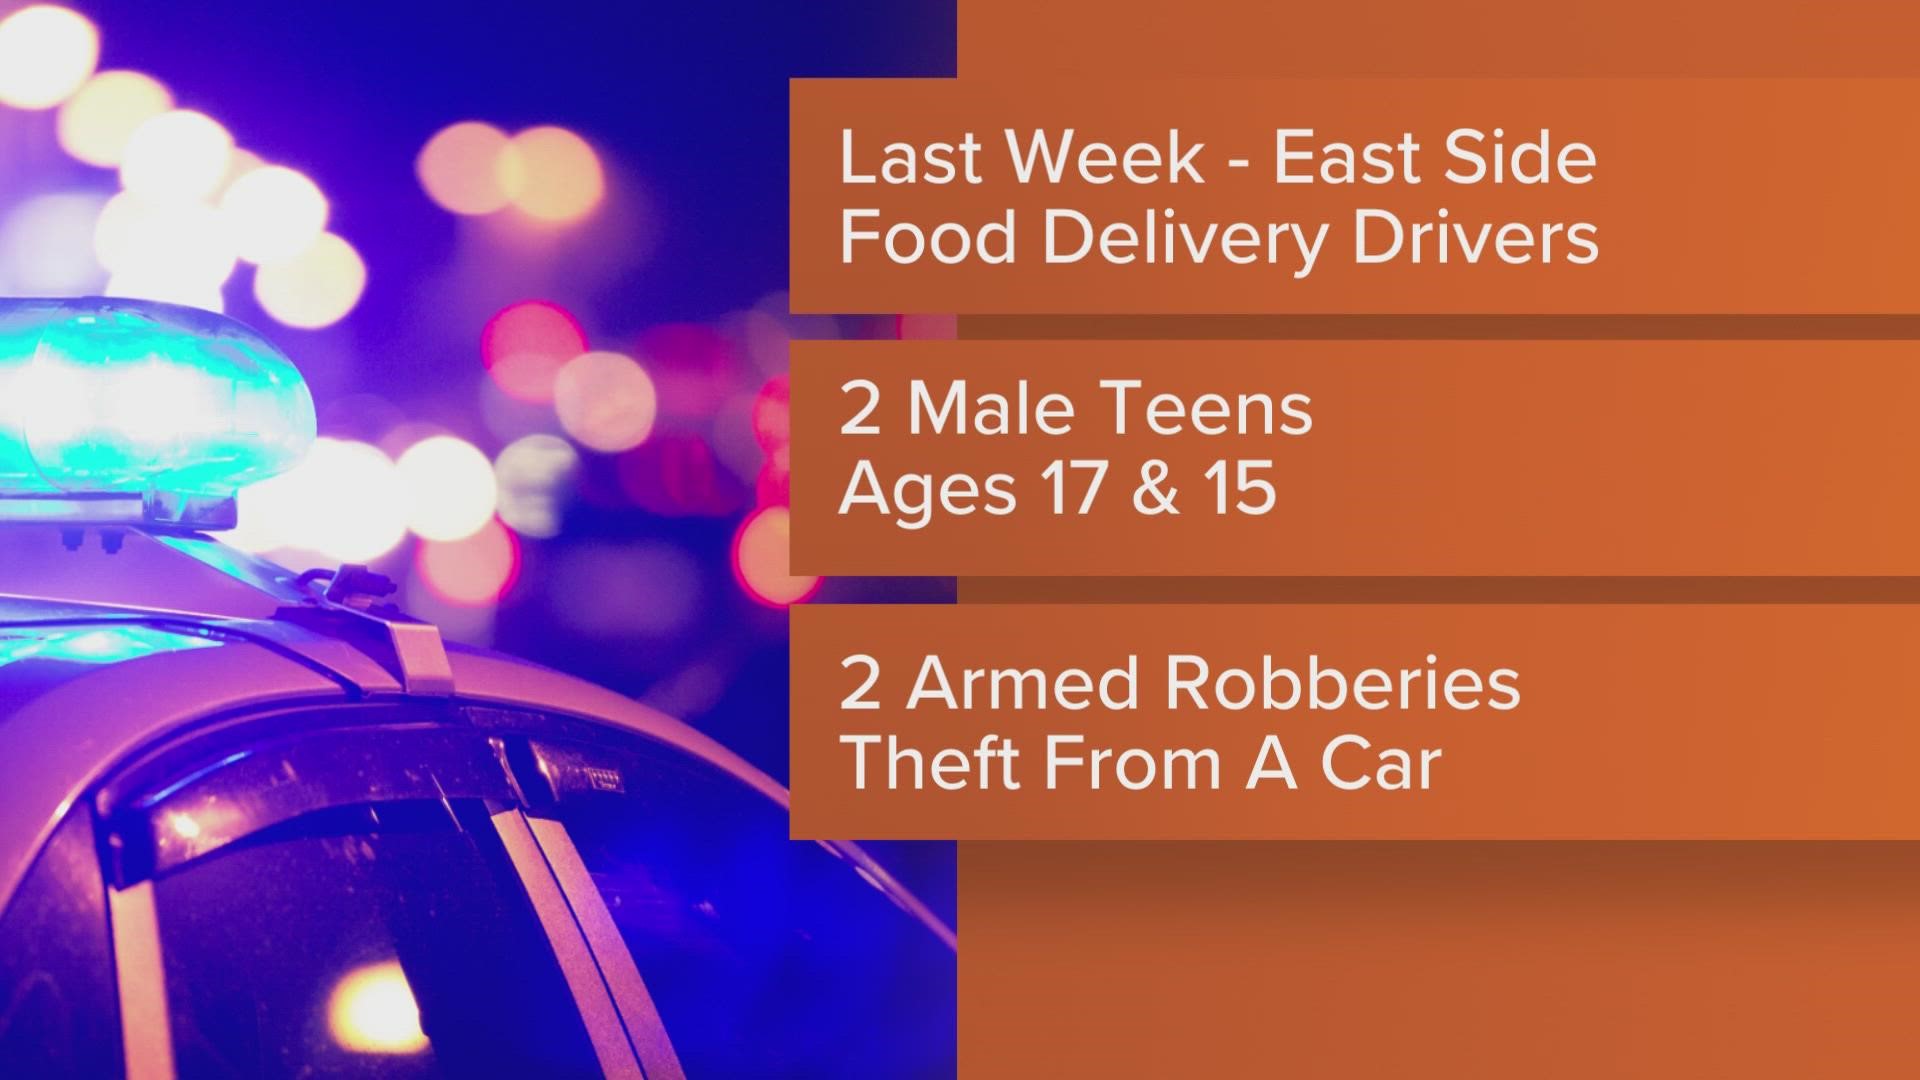 Two teenagers were arrested last week for their alleged roles in two armed robberies of food delivery drivers on Indianapolis' east side, IMPD announced Thursday.